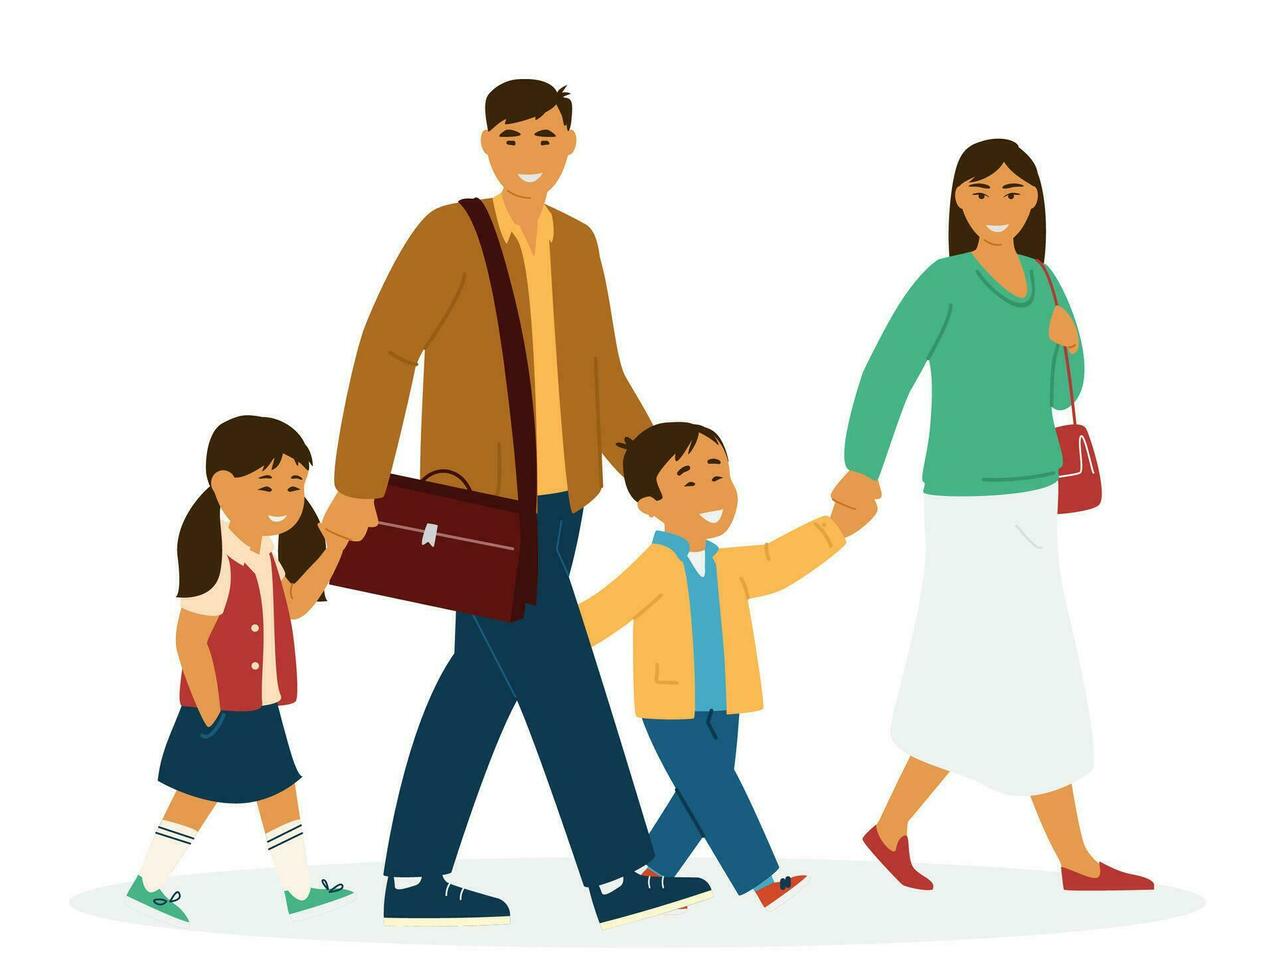 Flat Vector Illustration Of Smiling Asian Family With Kids. Young Parents With Children Walking.